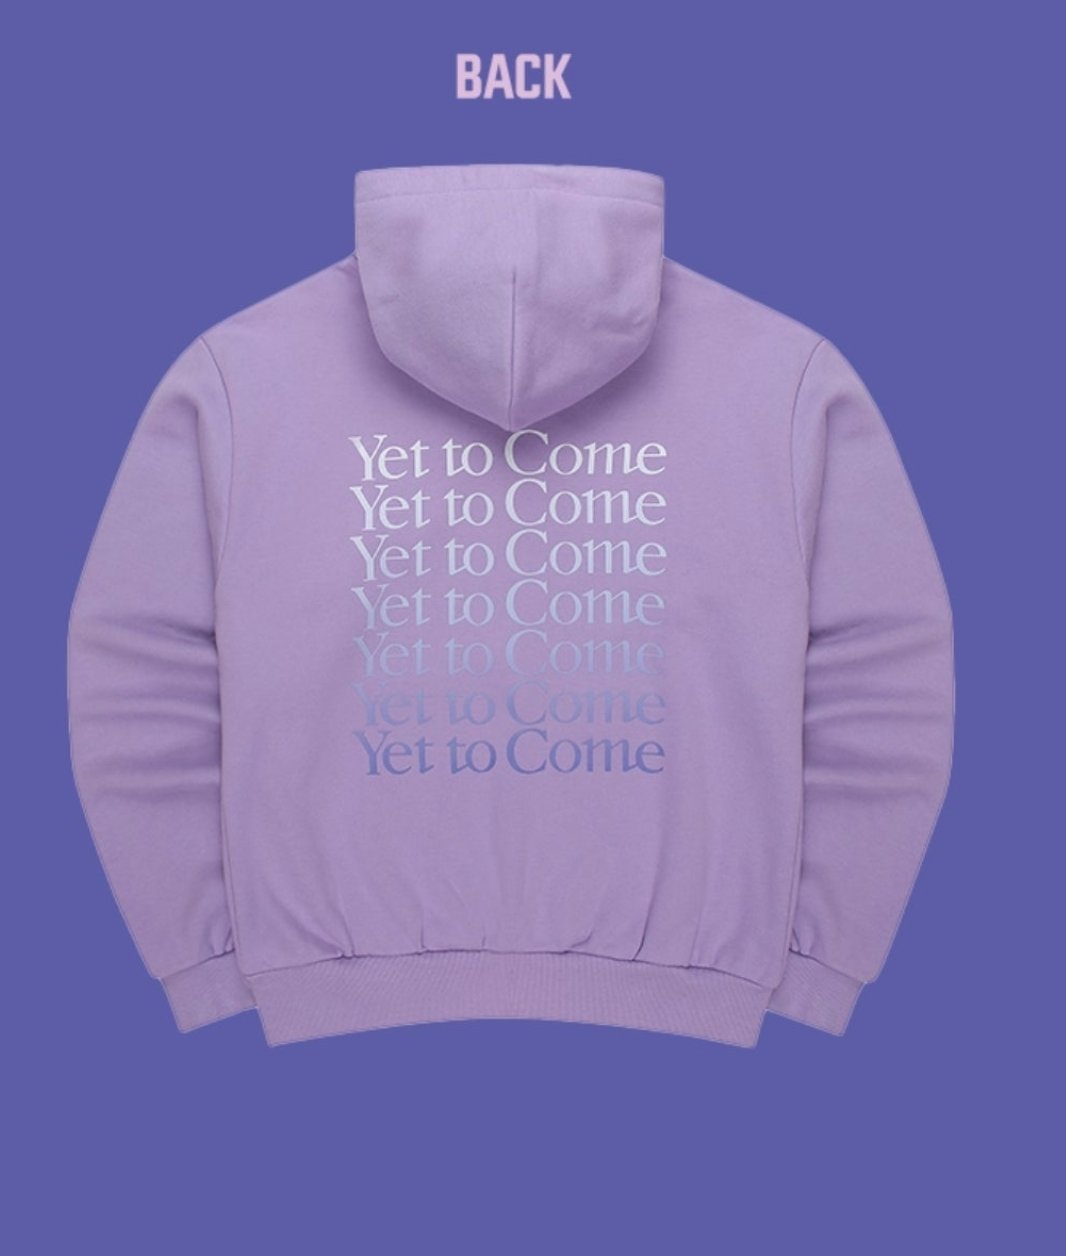 BTS 'Yet To Come' in Busan Hoodie💜